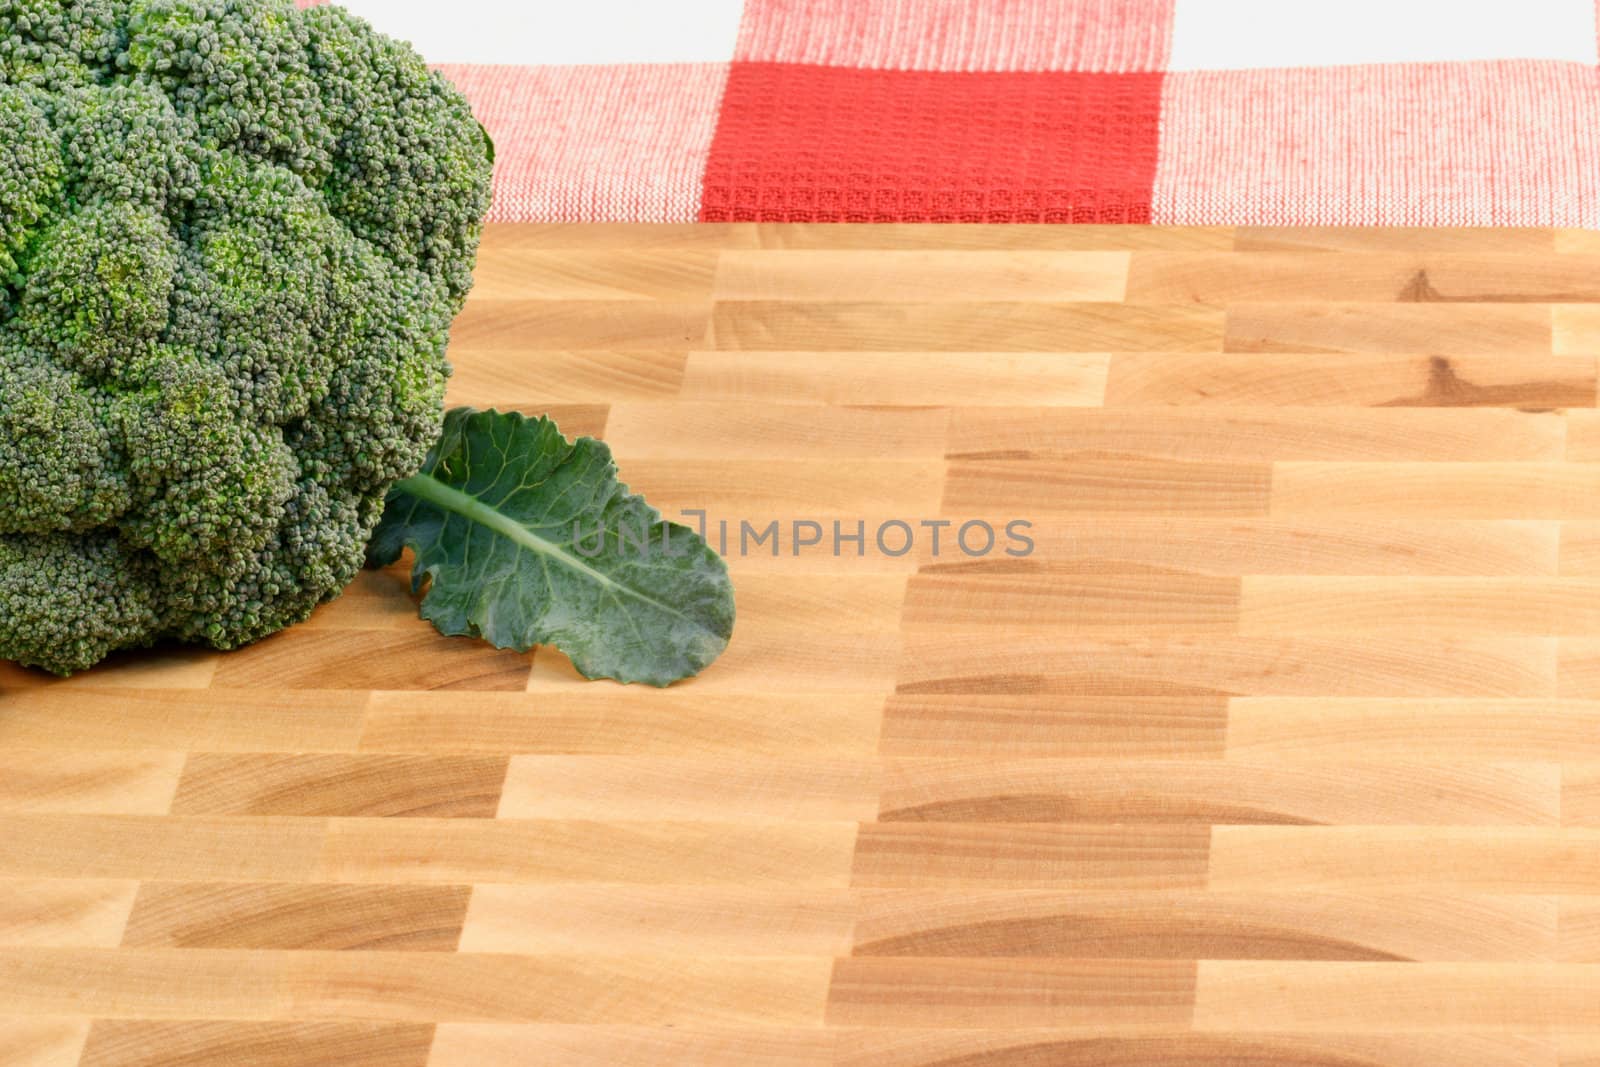 broccoli on fine wood cutting board with tablecloth background 